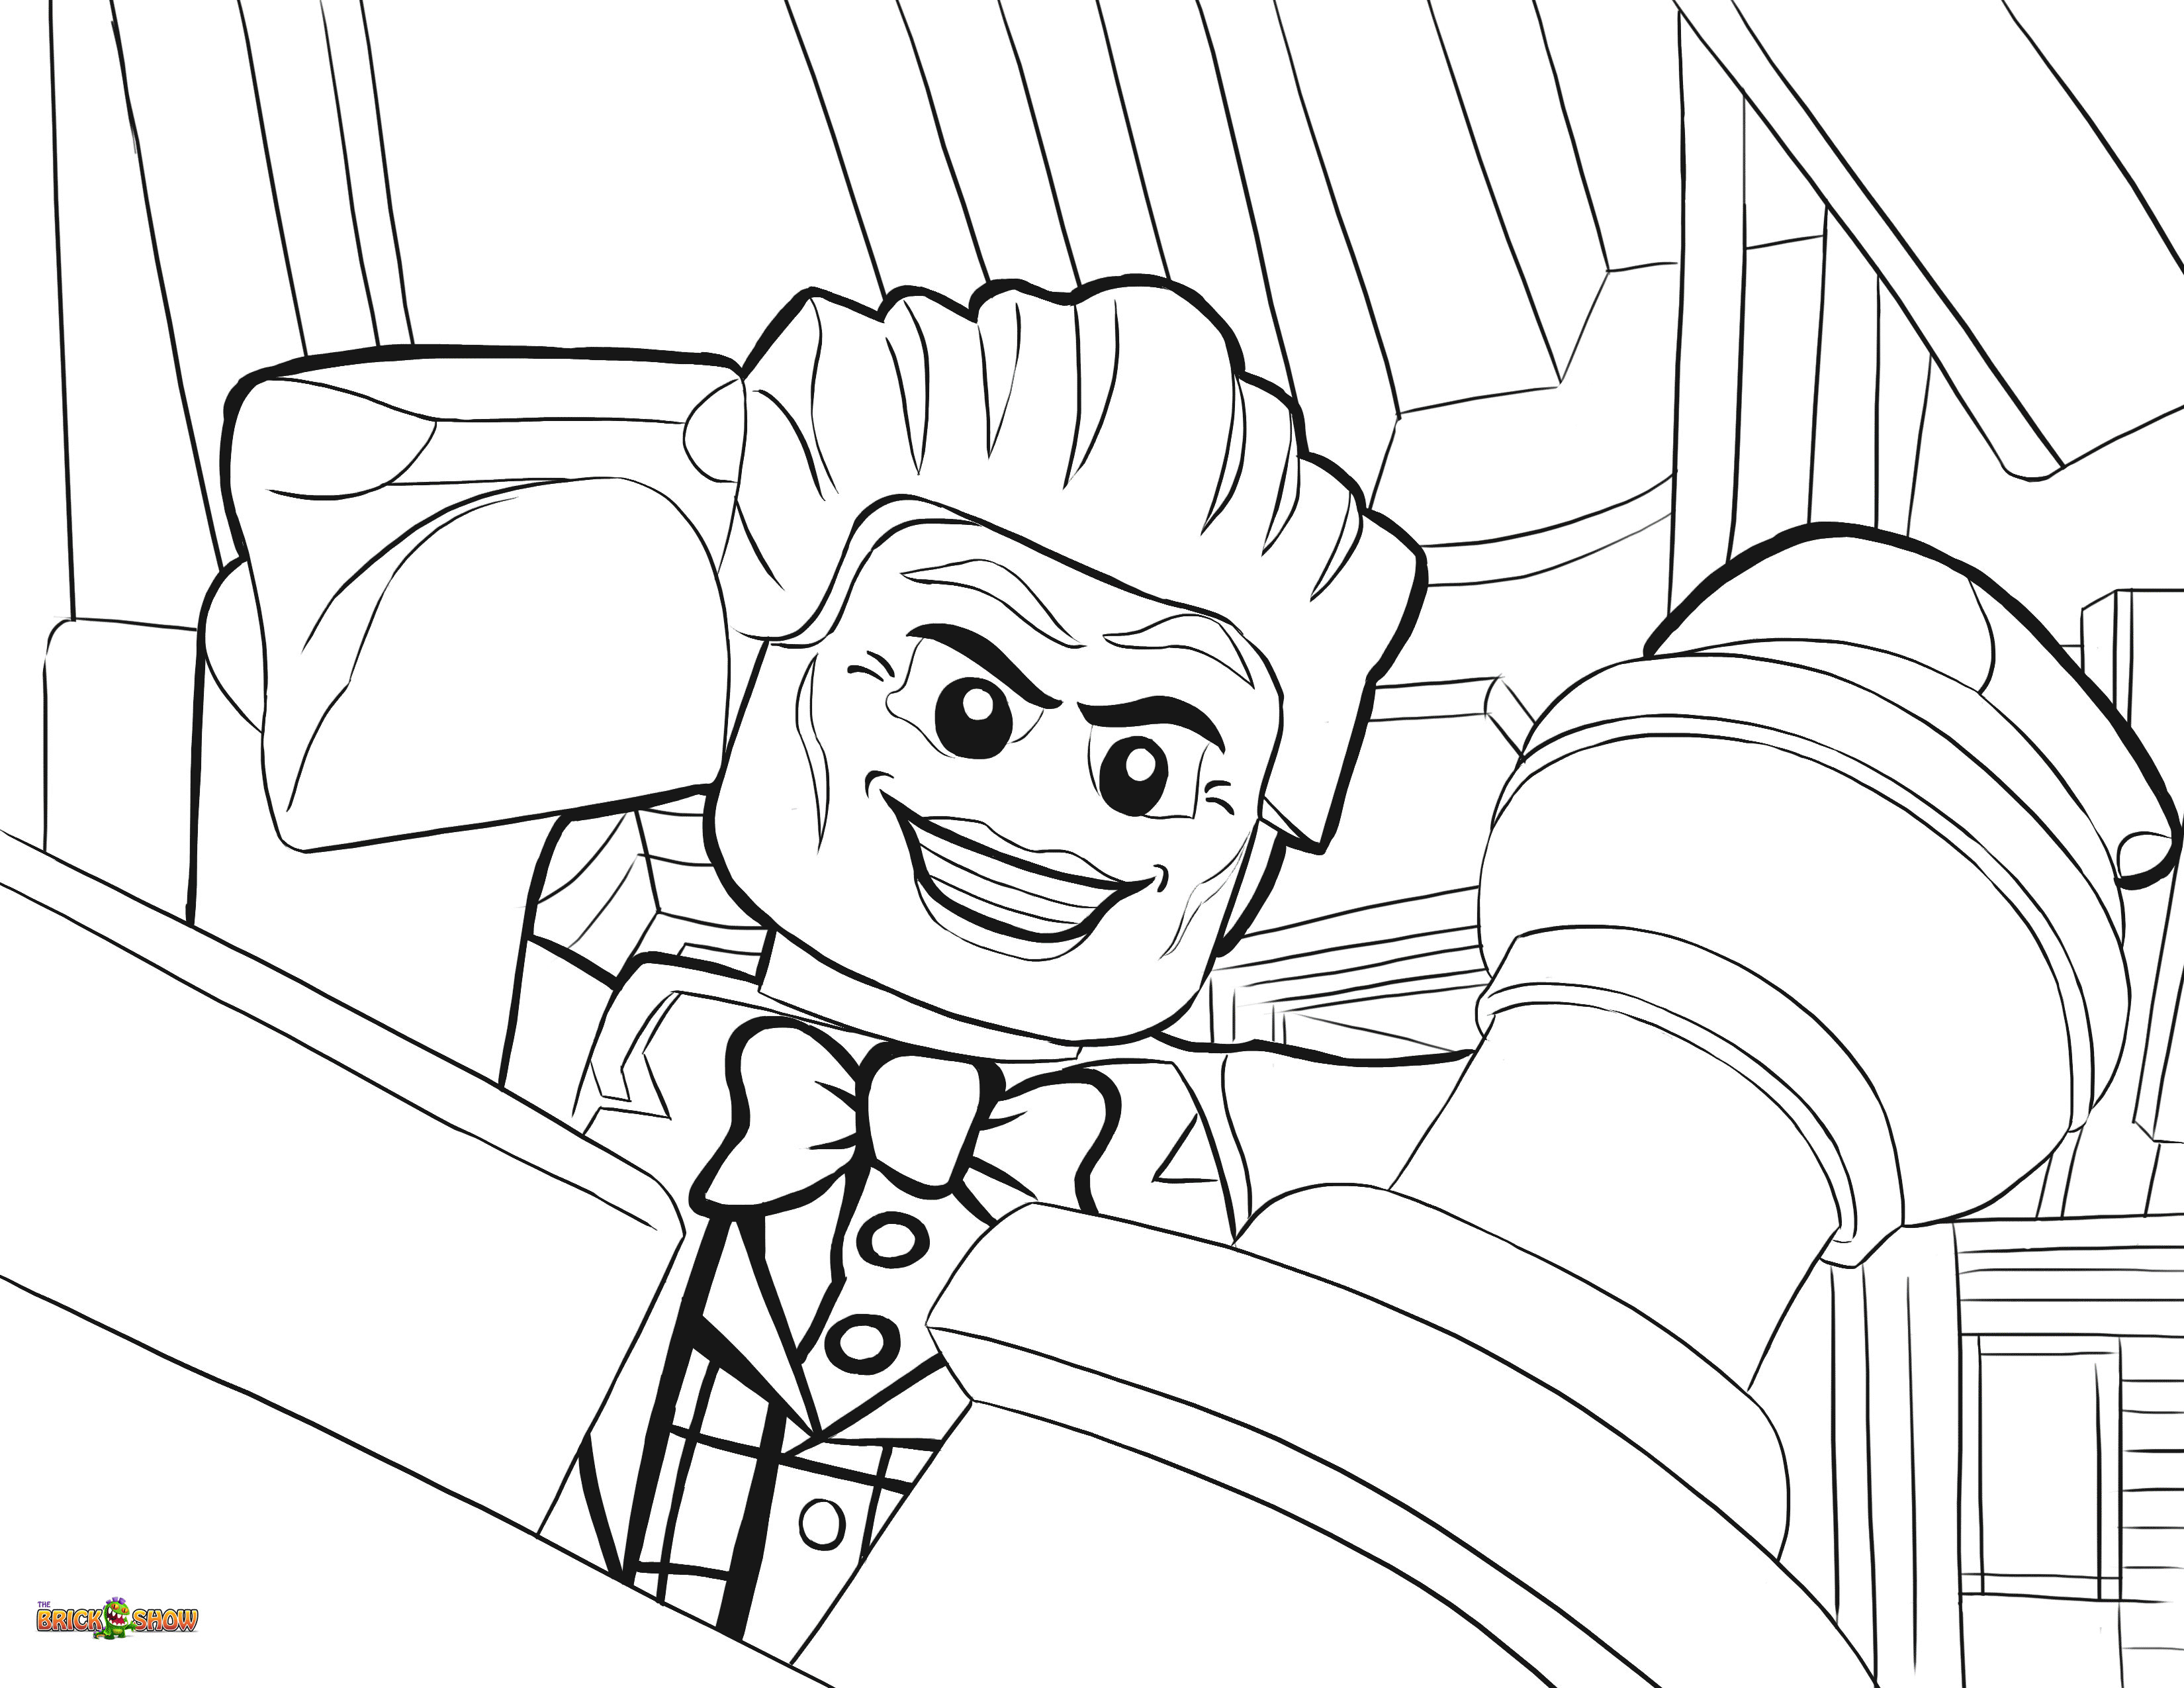 Free Printable Lego Superhero Coloring Pages - Coloring Home